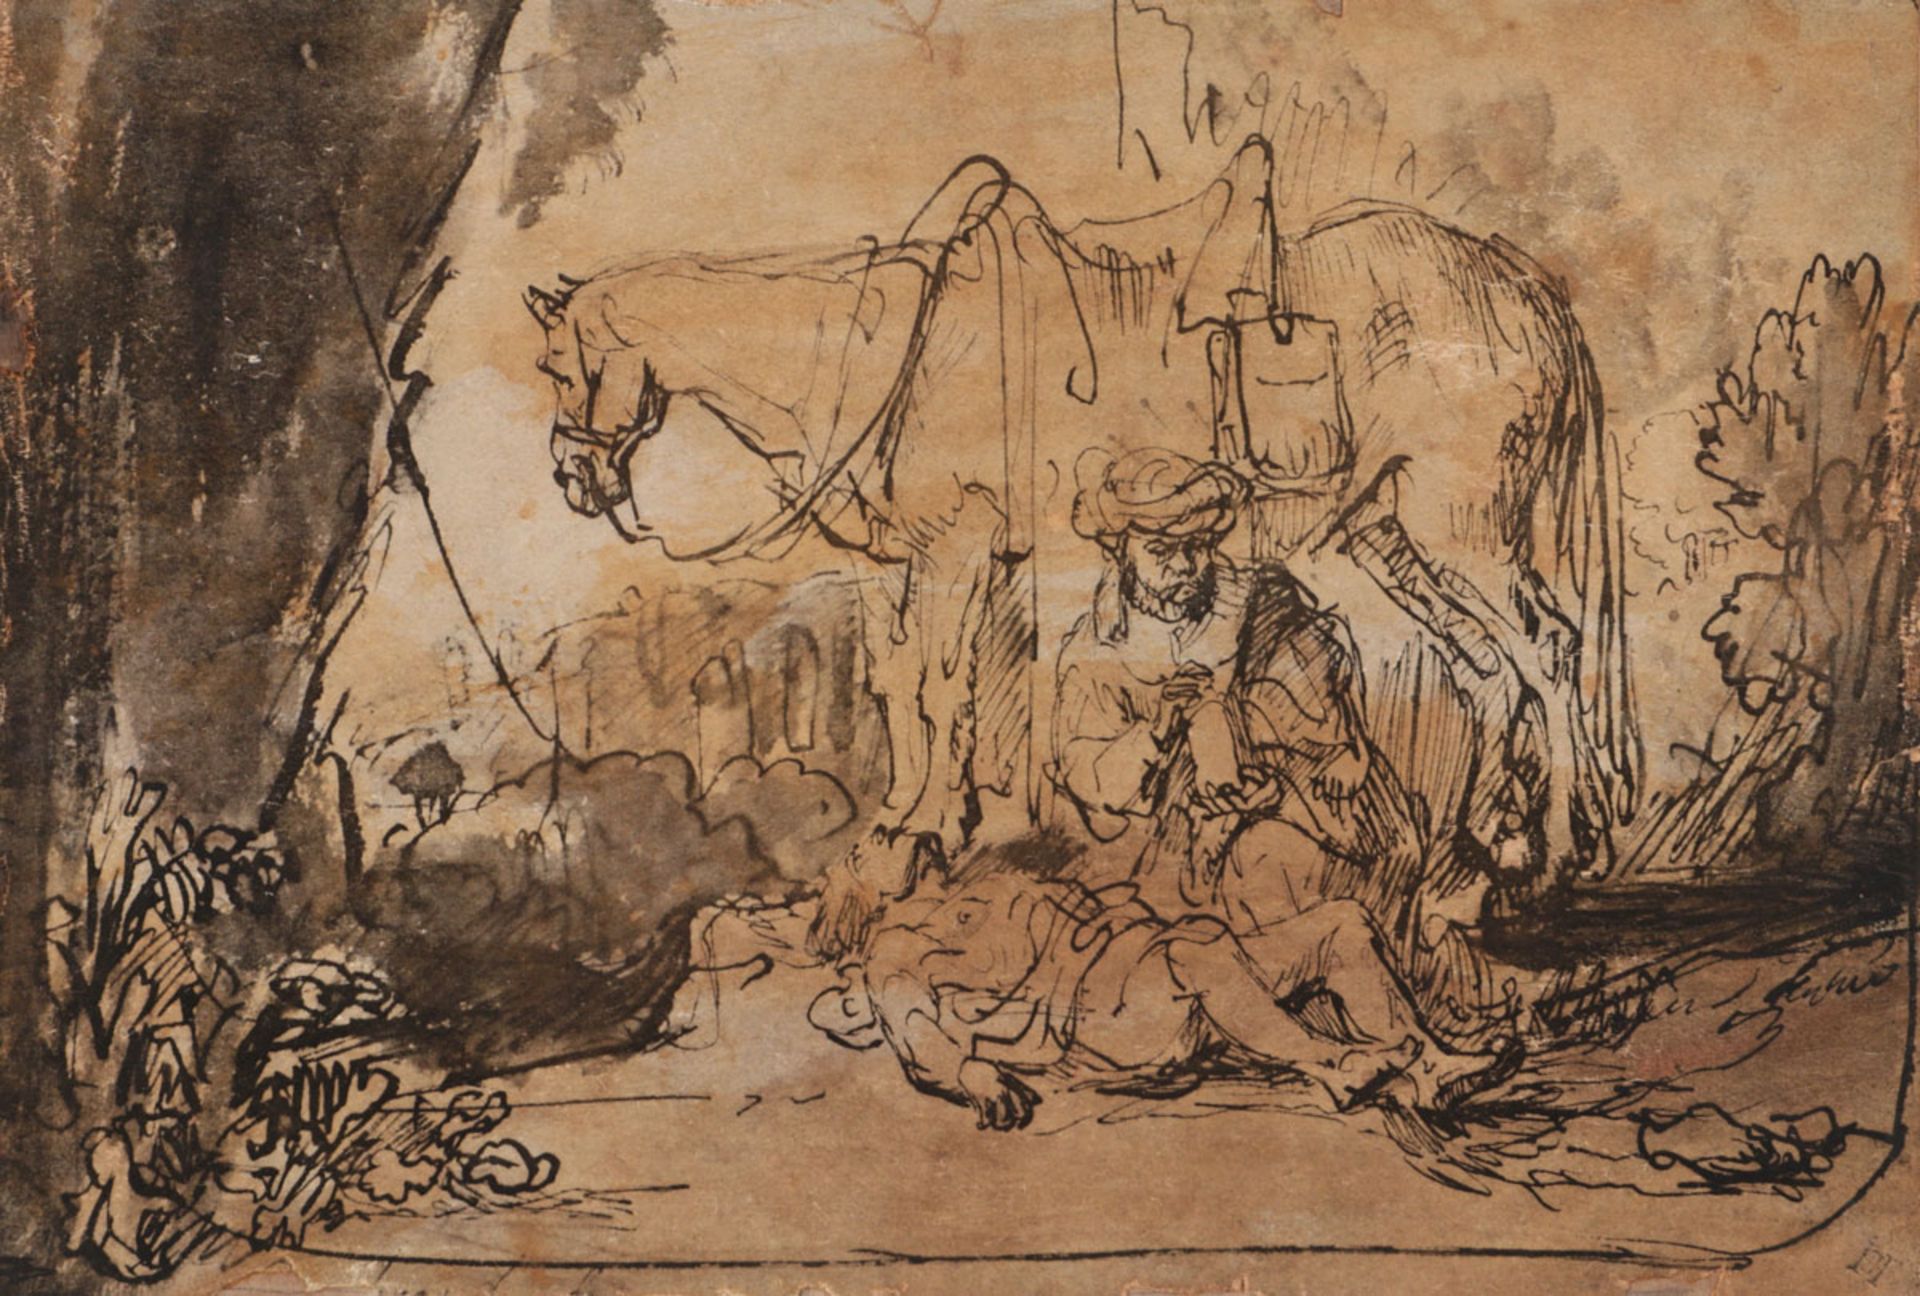 DUTCH SCHOOL (17TH/18TH CENTURY), THE GOOD SAMARITAN Ink and wash on paper, school of Rembrandt.